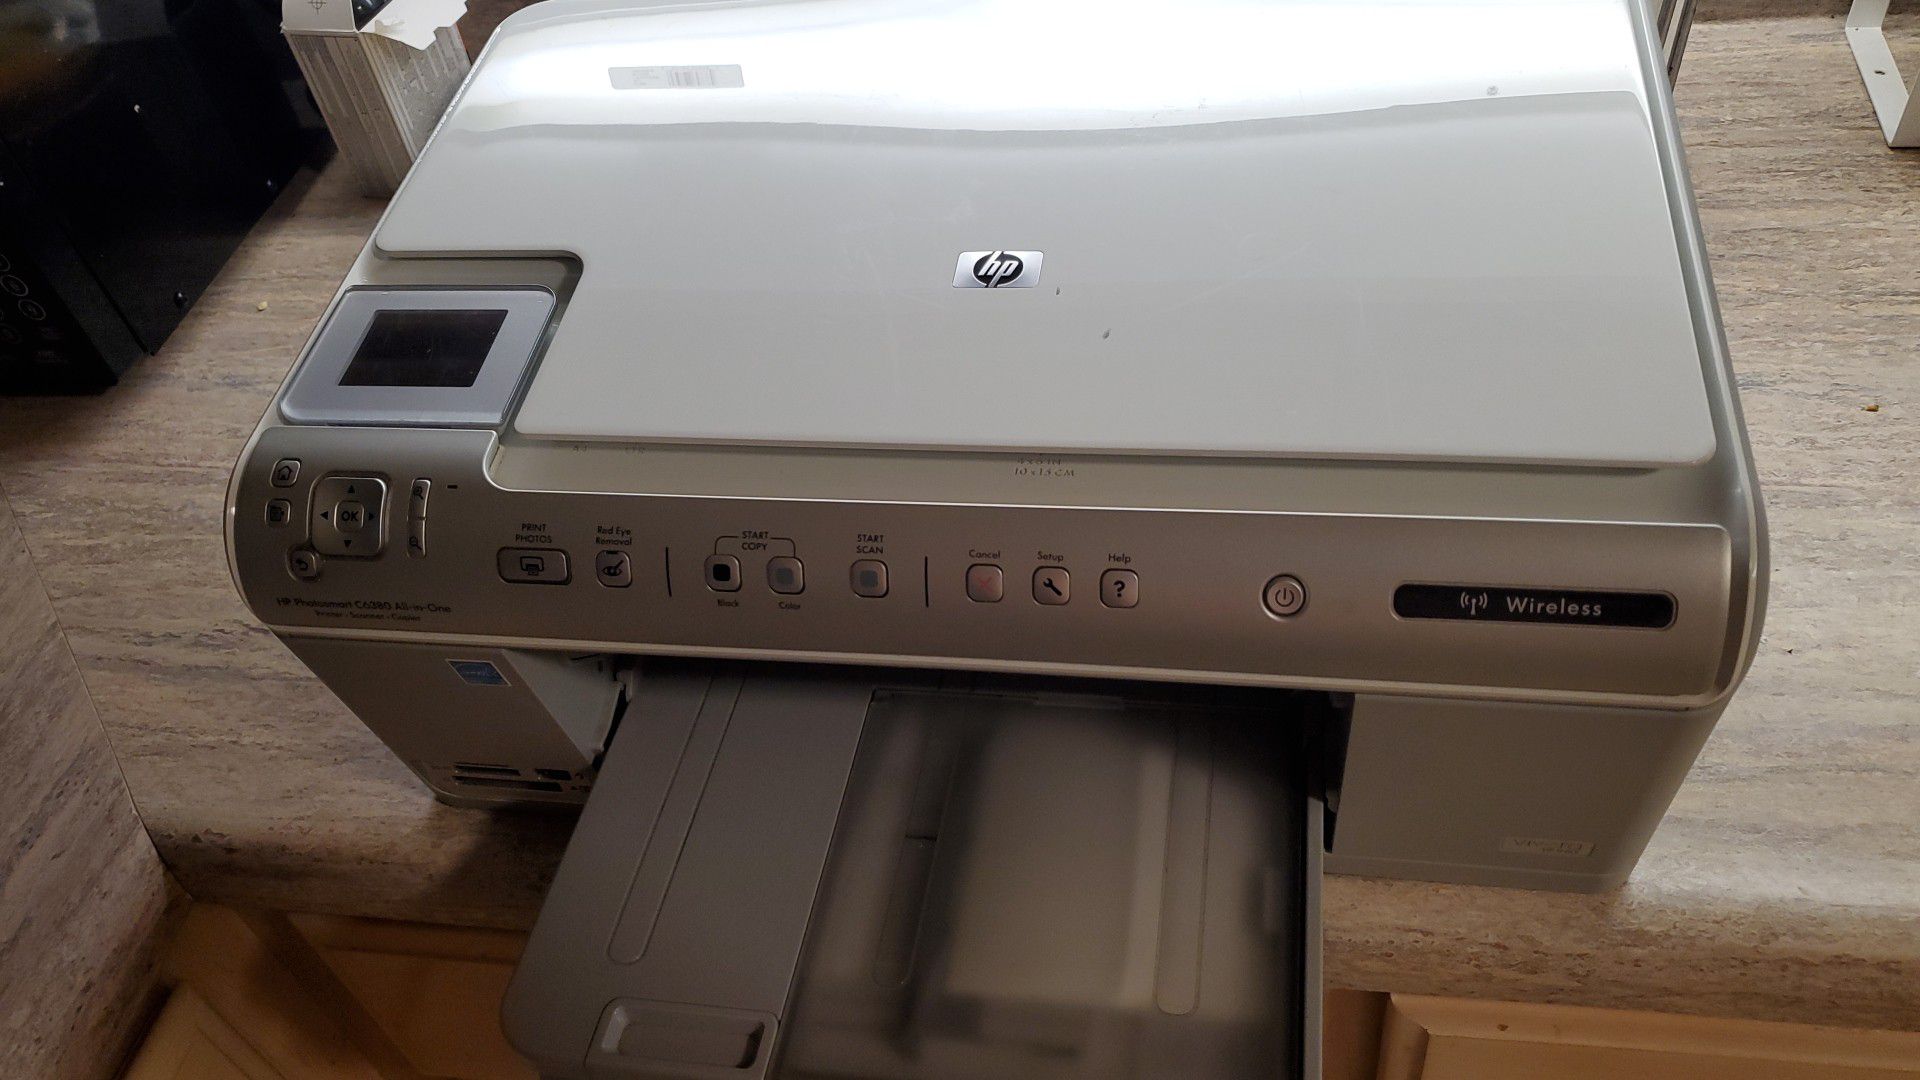 Wireless HP Printer and Scanner